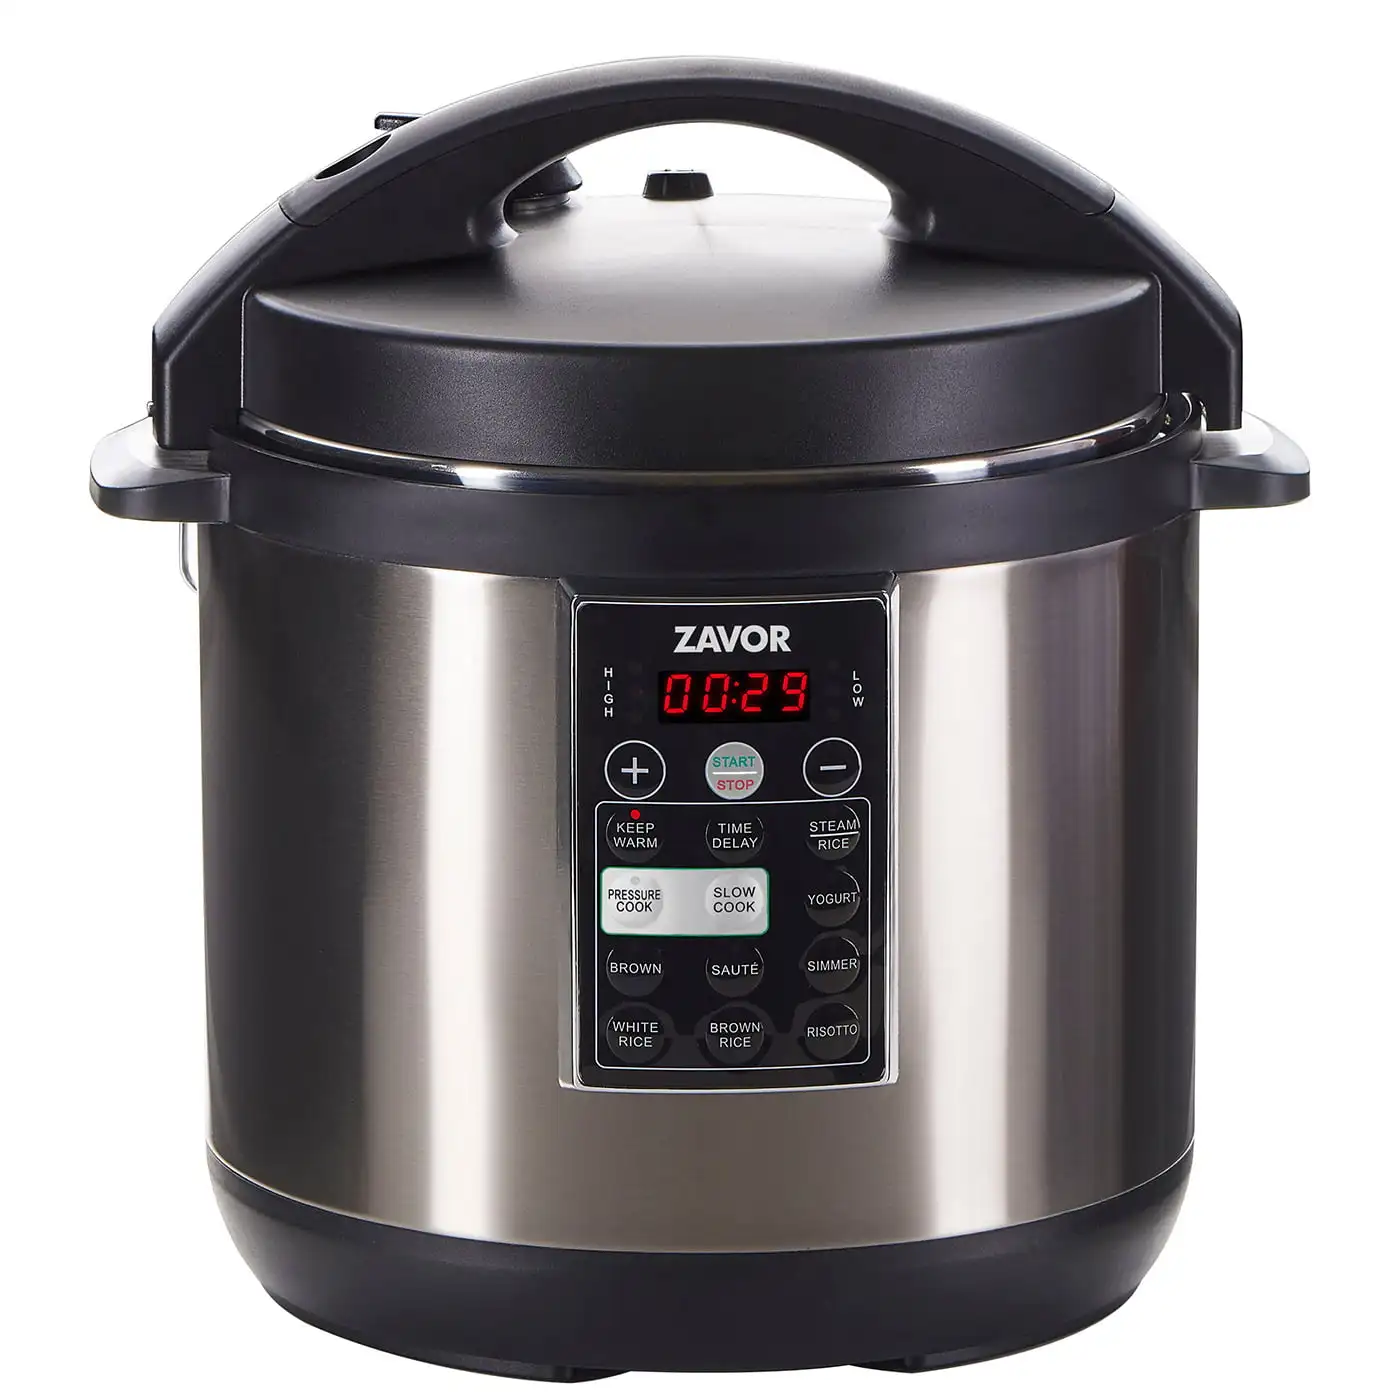 Electric rice cooker LUX Multicooker, Electric Pressure Cooker and Slow and Rice Cooker kitchen